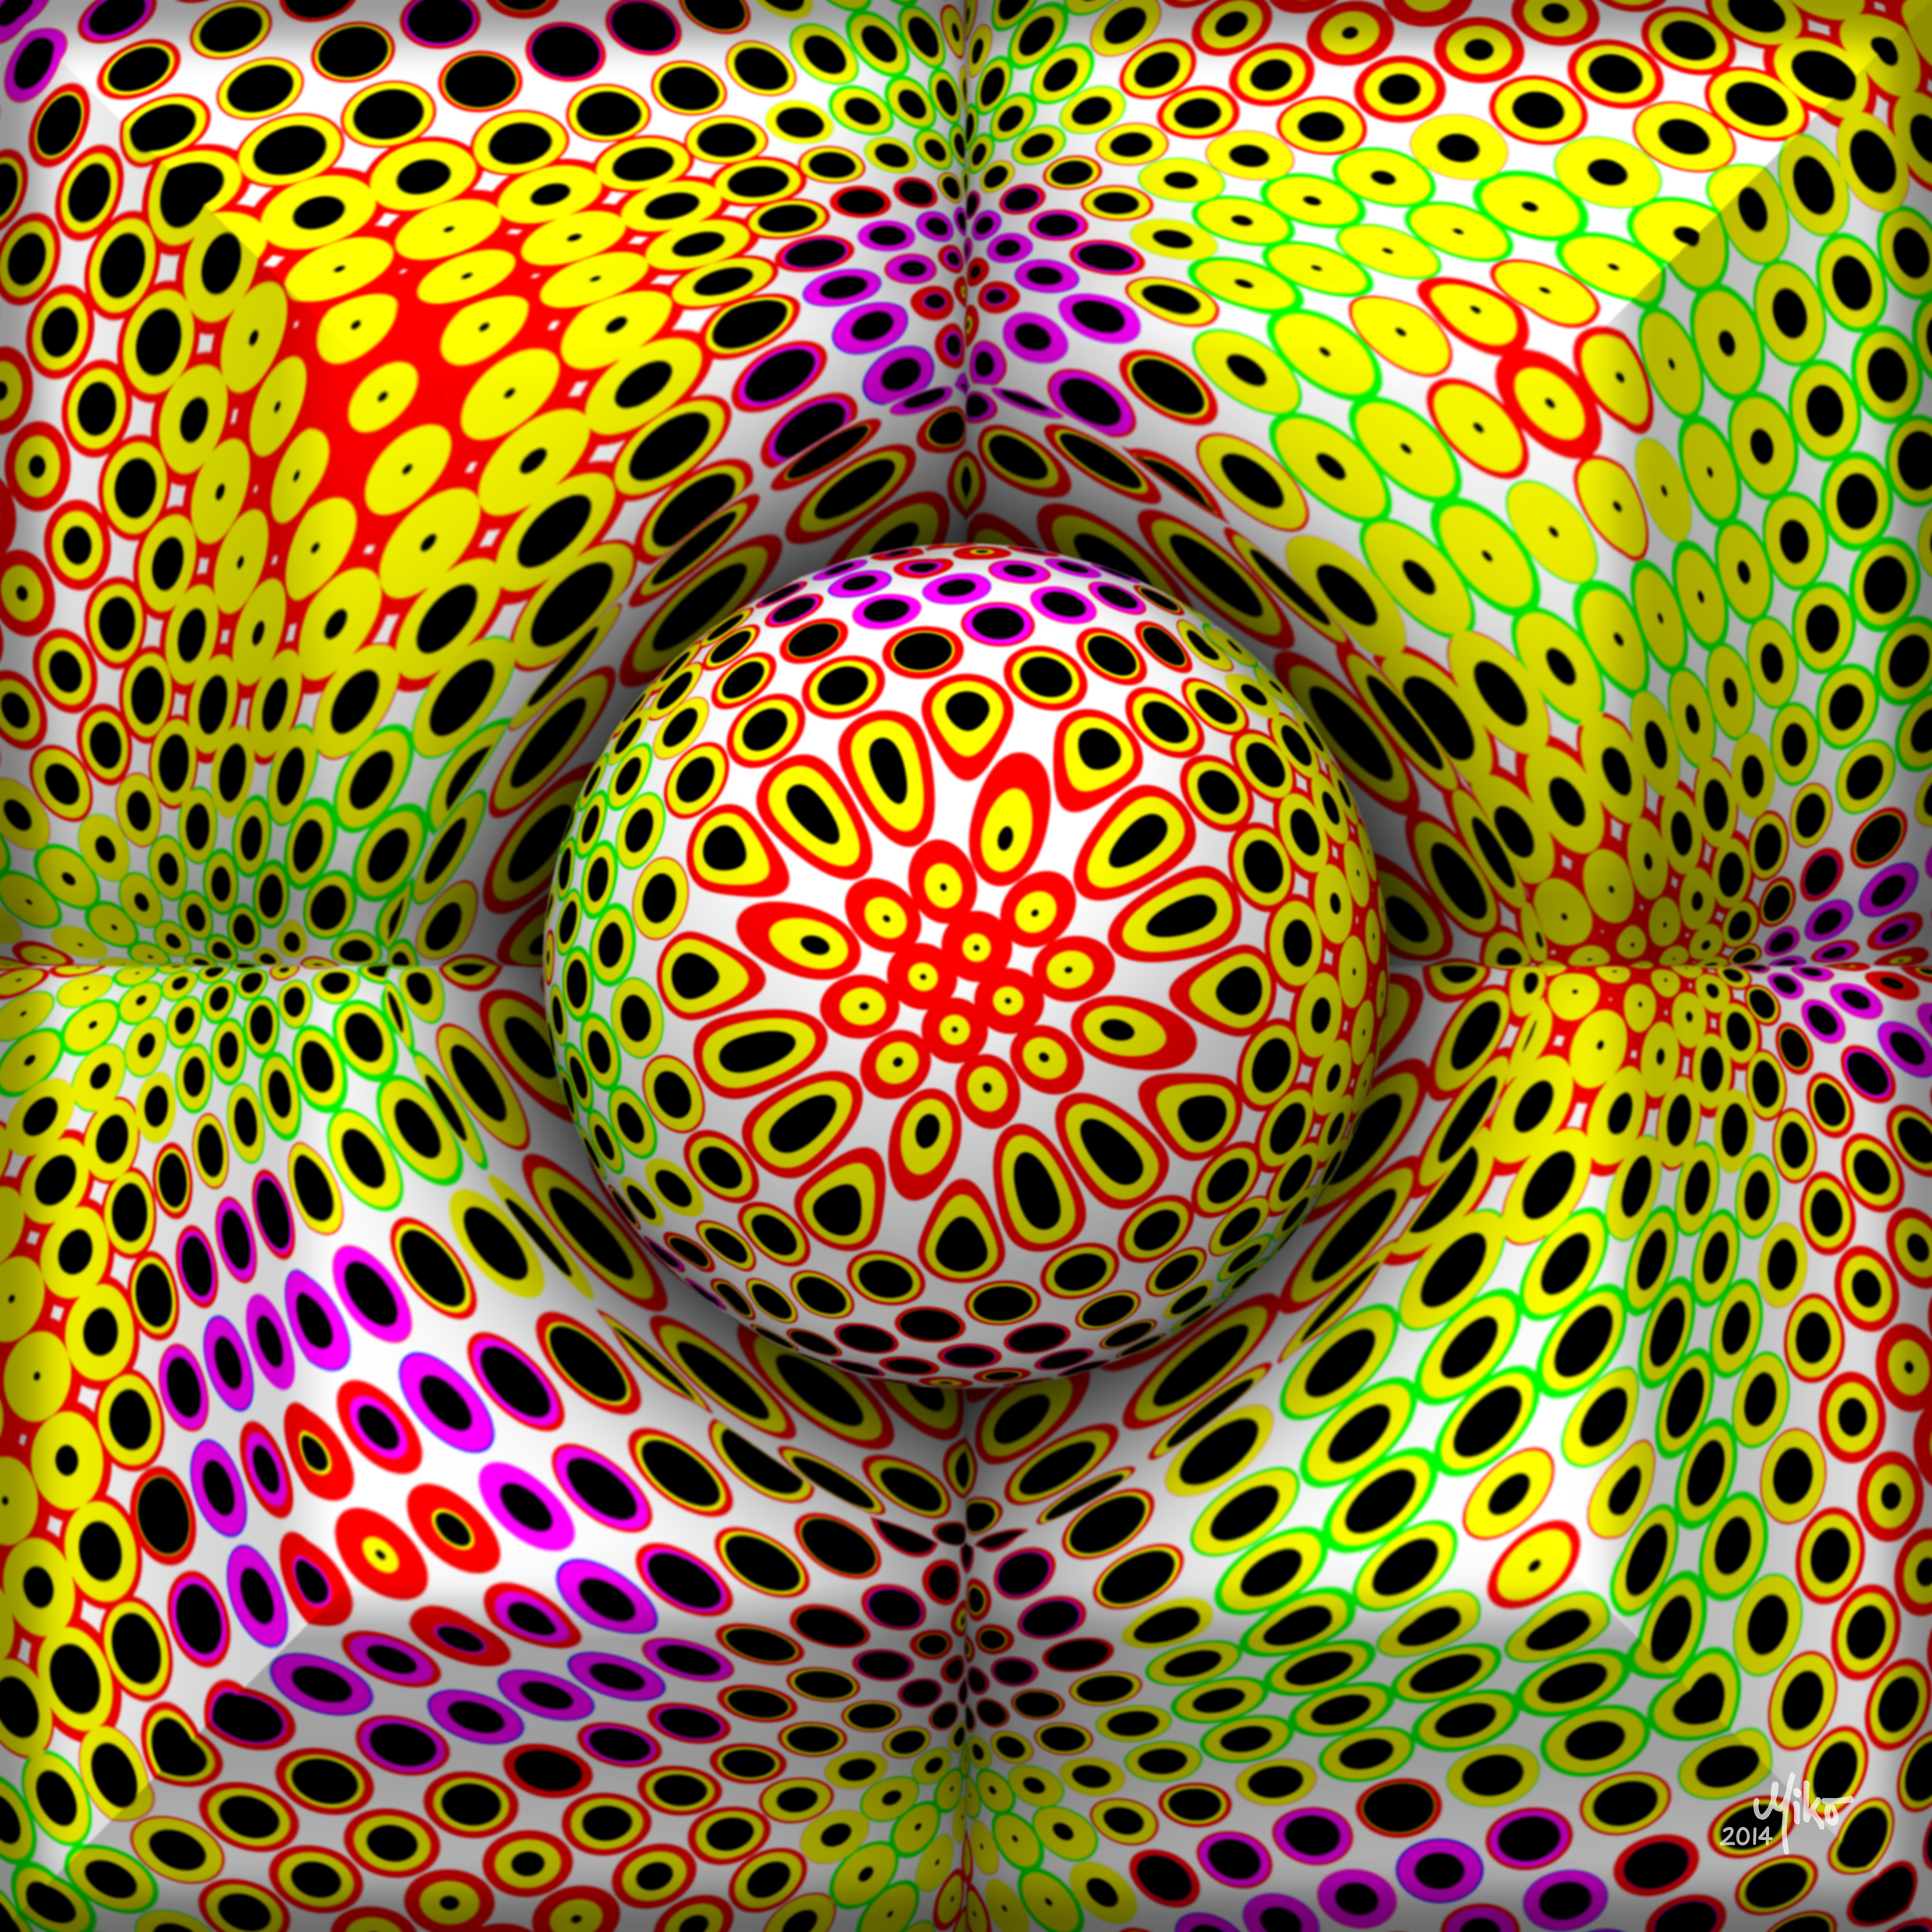 Miko-Art ""Ball In Four Cubes 0058 2014"" (Digital-Physical Painting) 80x80cm. - Image 3 of 5